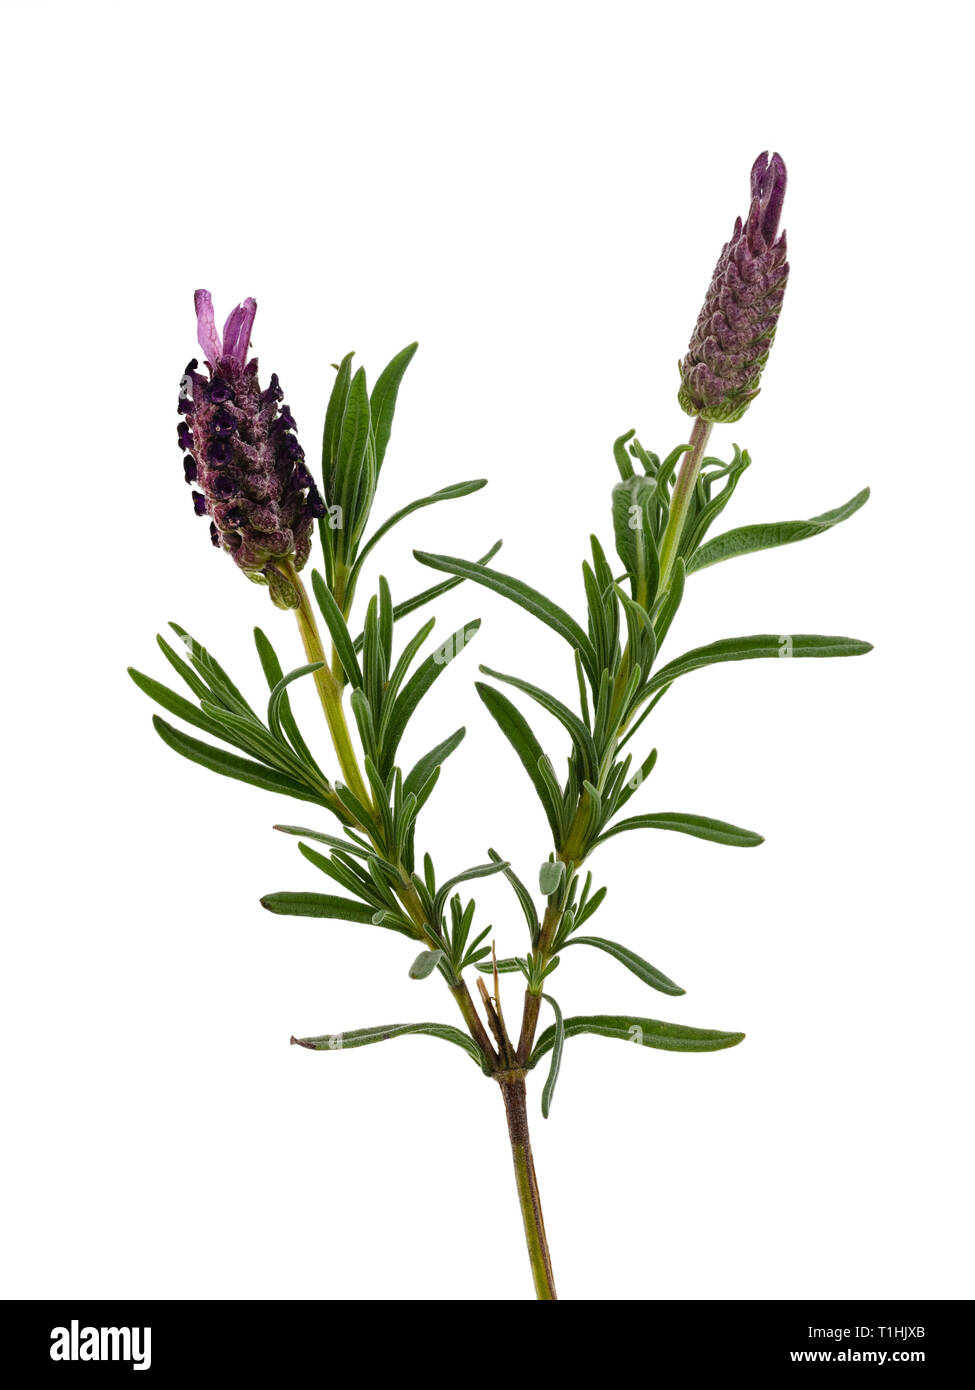 Flower stem of the spring to summer blooming French lavender, Lavandula stoechas 'Anouk',  on a white background Stock Photo